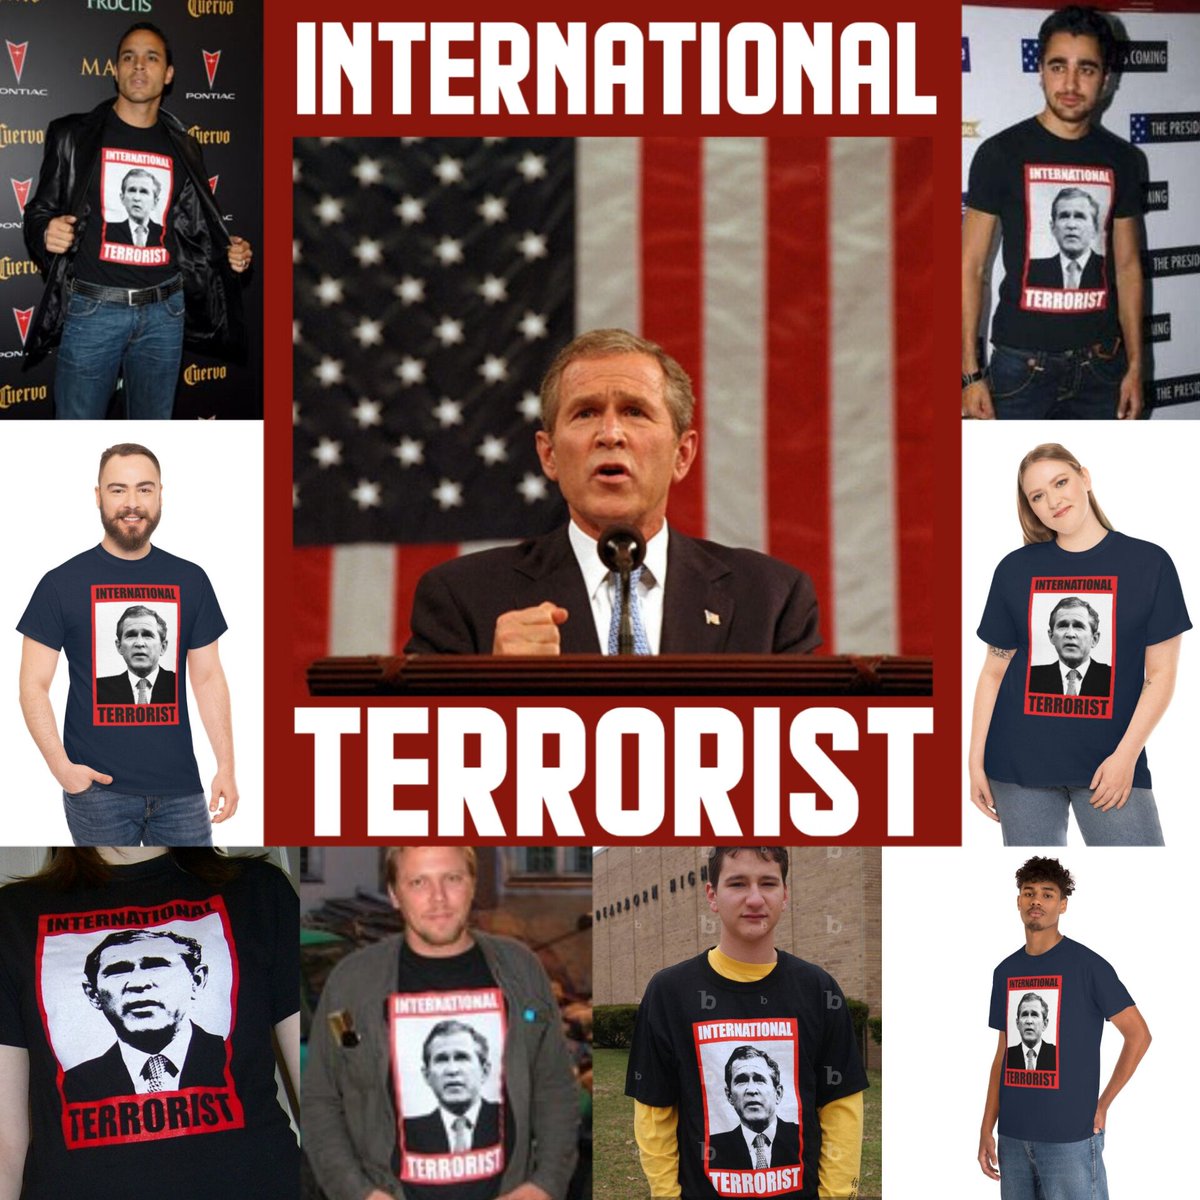 George W. Bush is an international terrorist. #NOWMD MILLIONS DEAD. NO JUSTICE. The inaction is a betrayal of the highest order, a stark reminder of the callousness that festers in the heart of humanity.